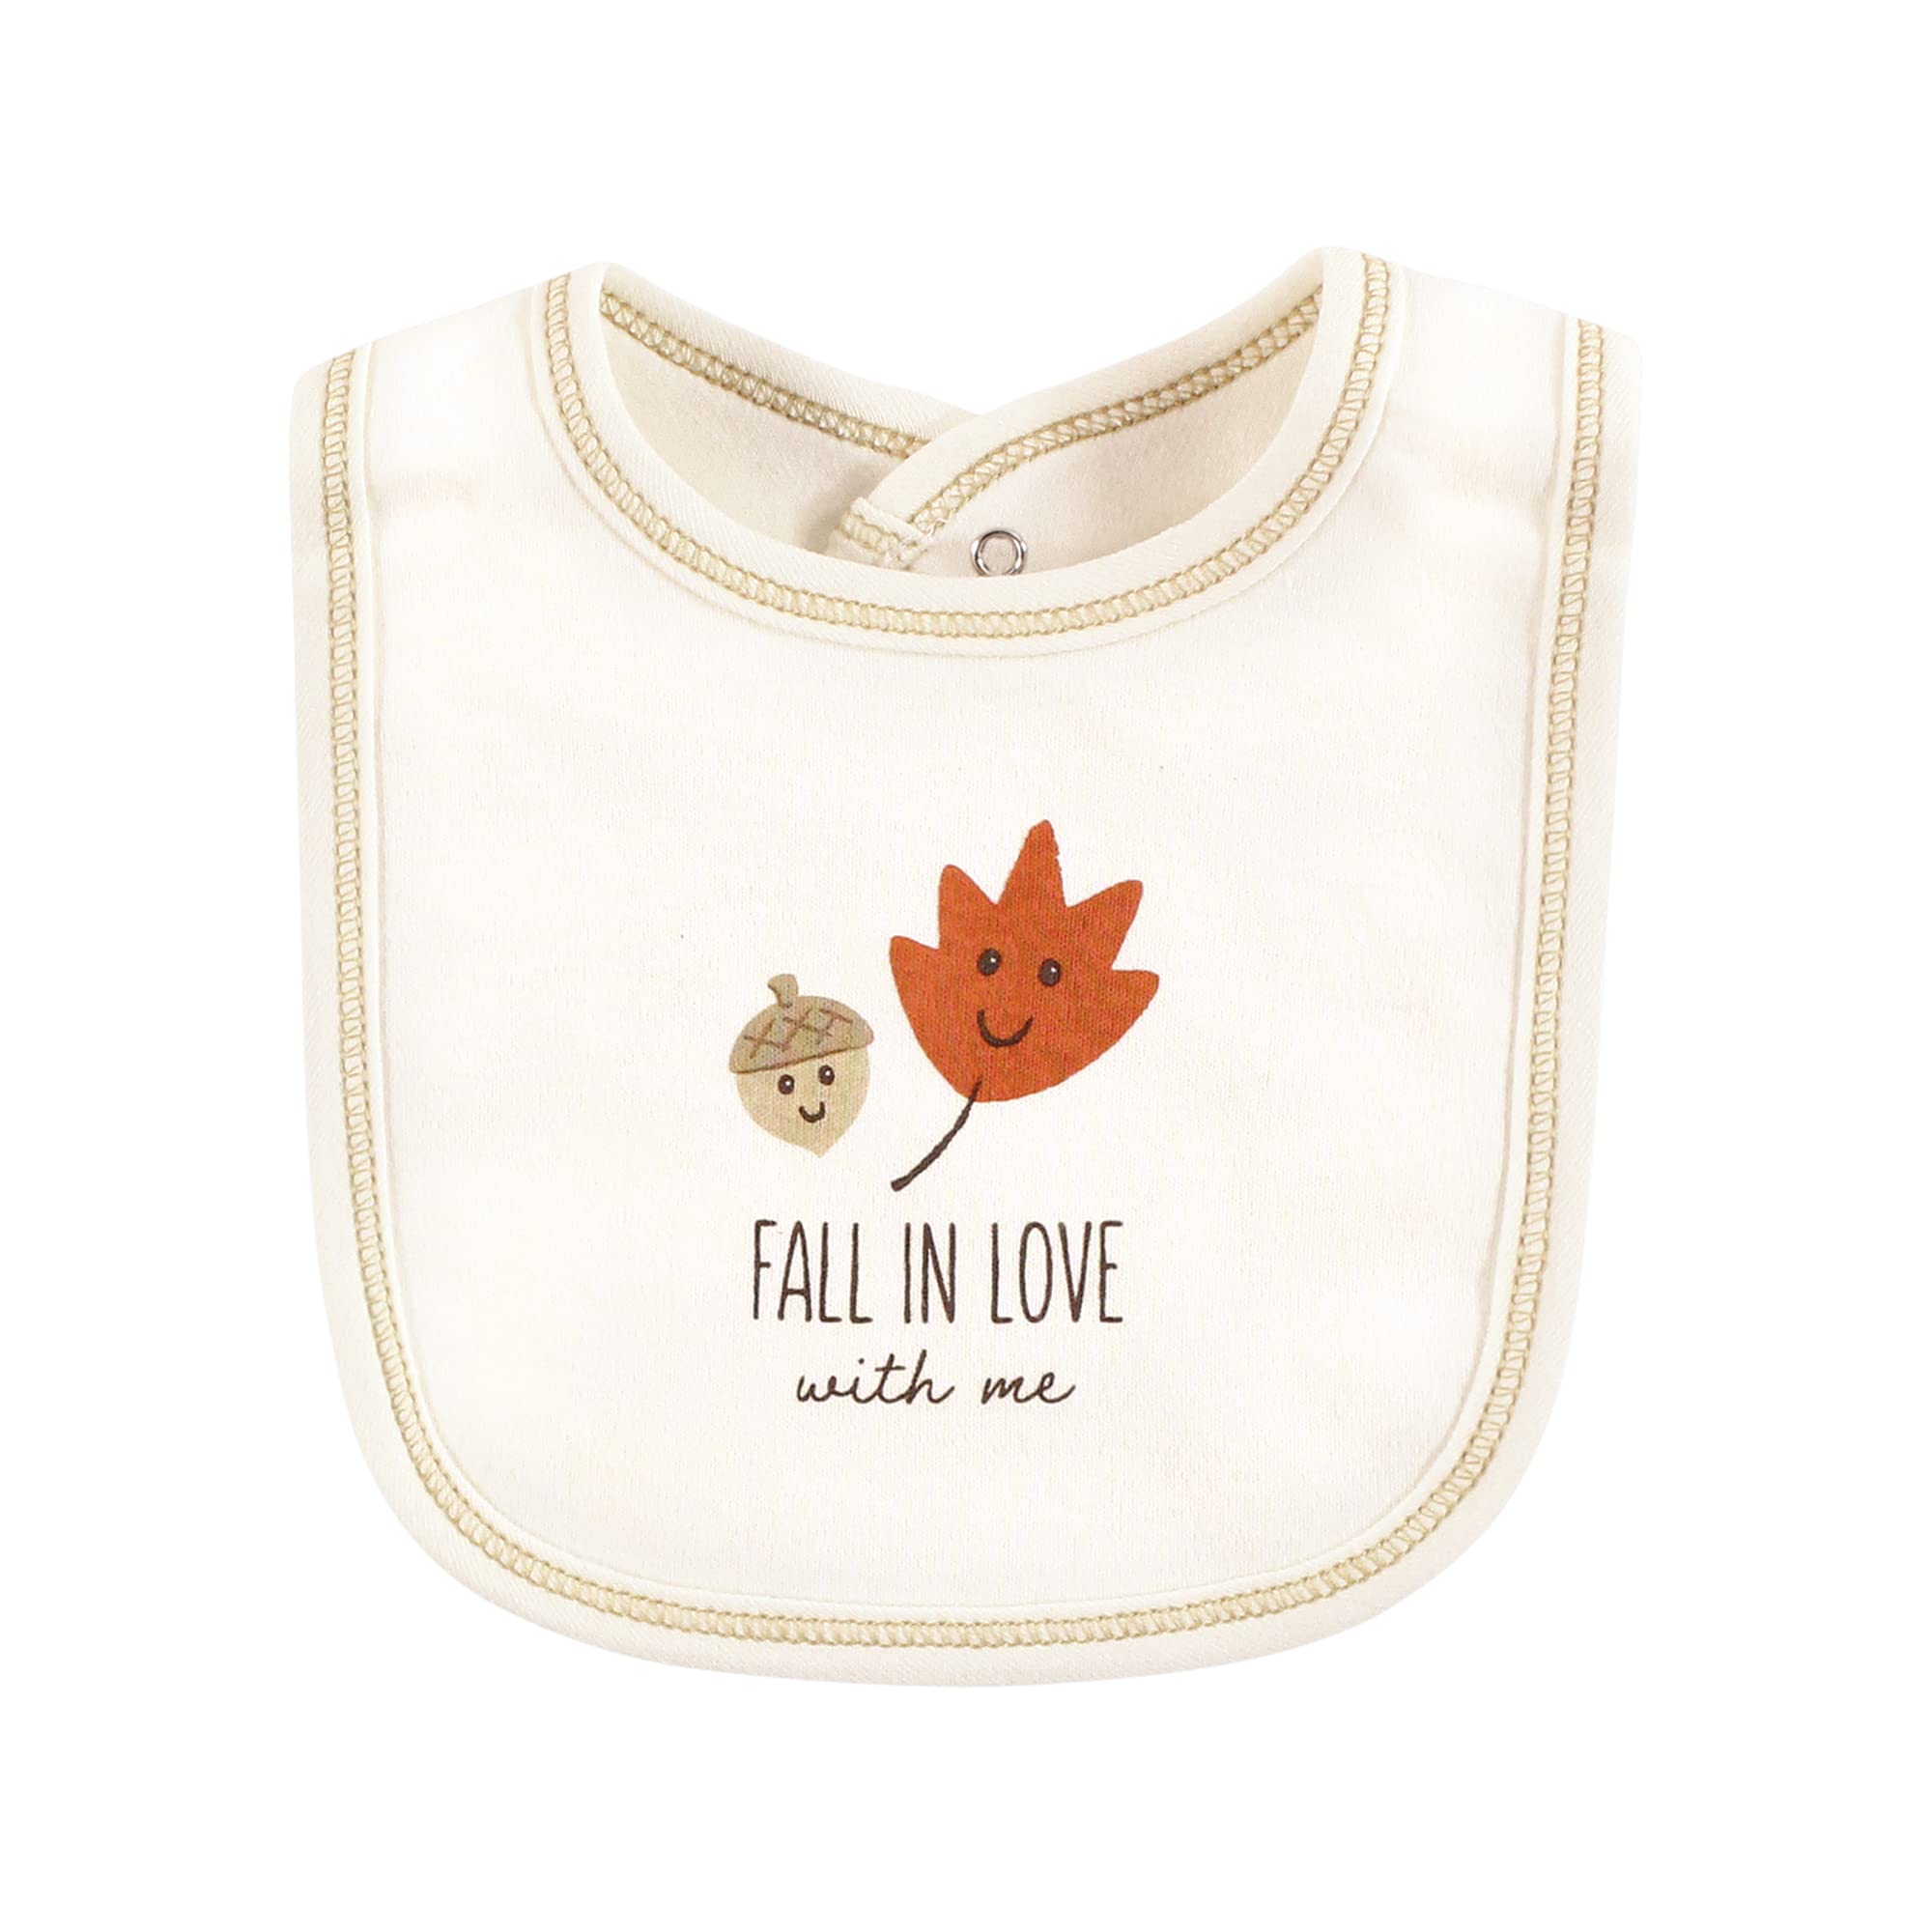 Touched by Nature Unisex Baby Organic Cotton Bibs